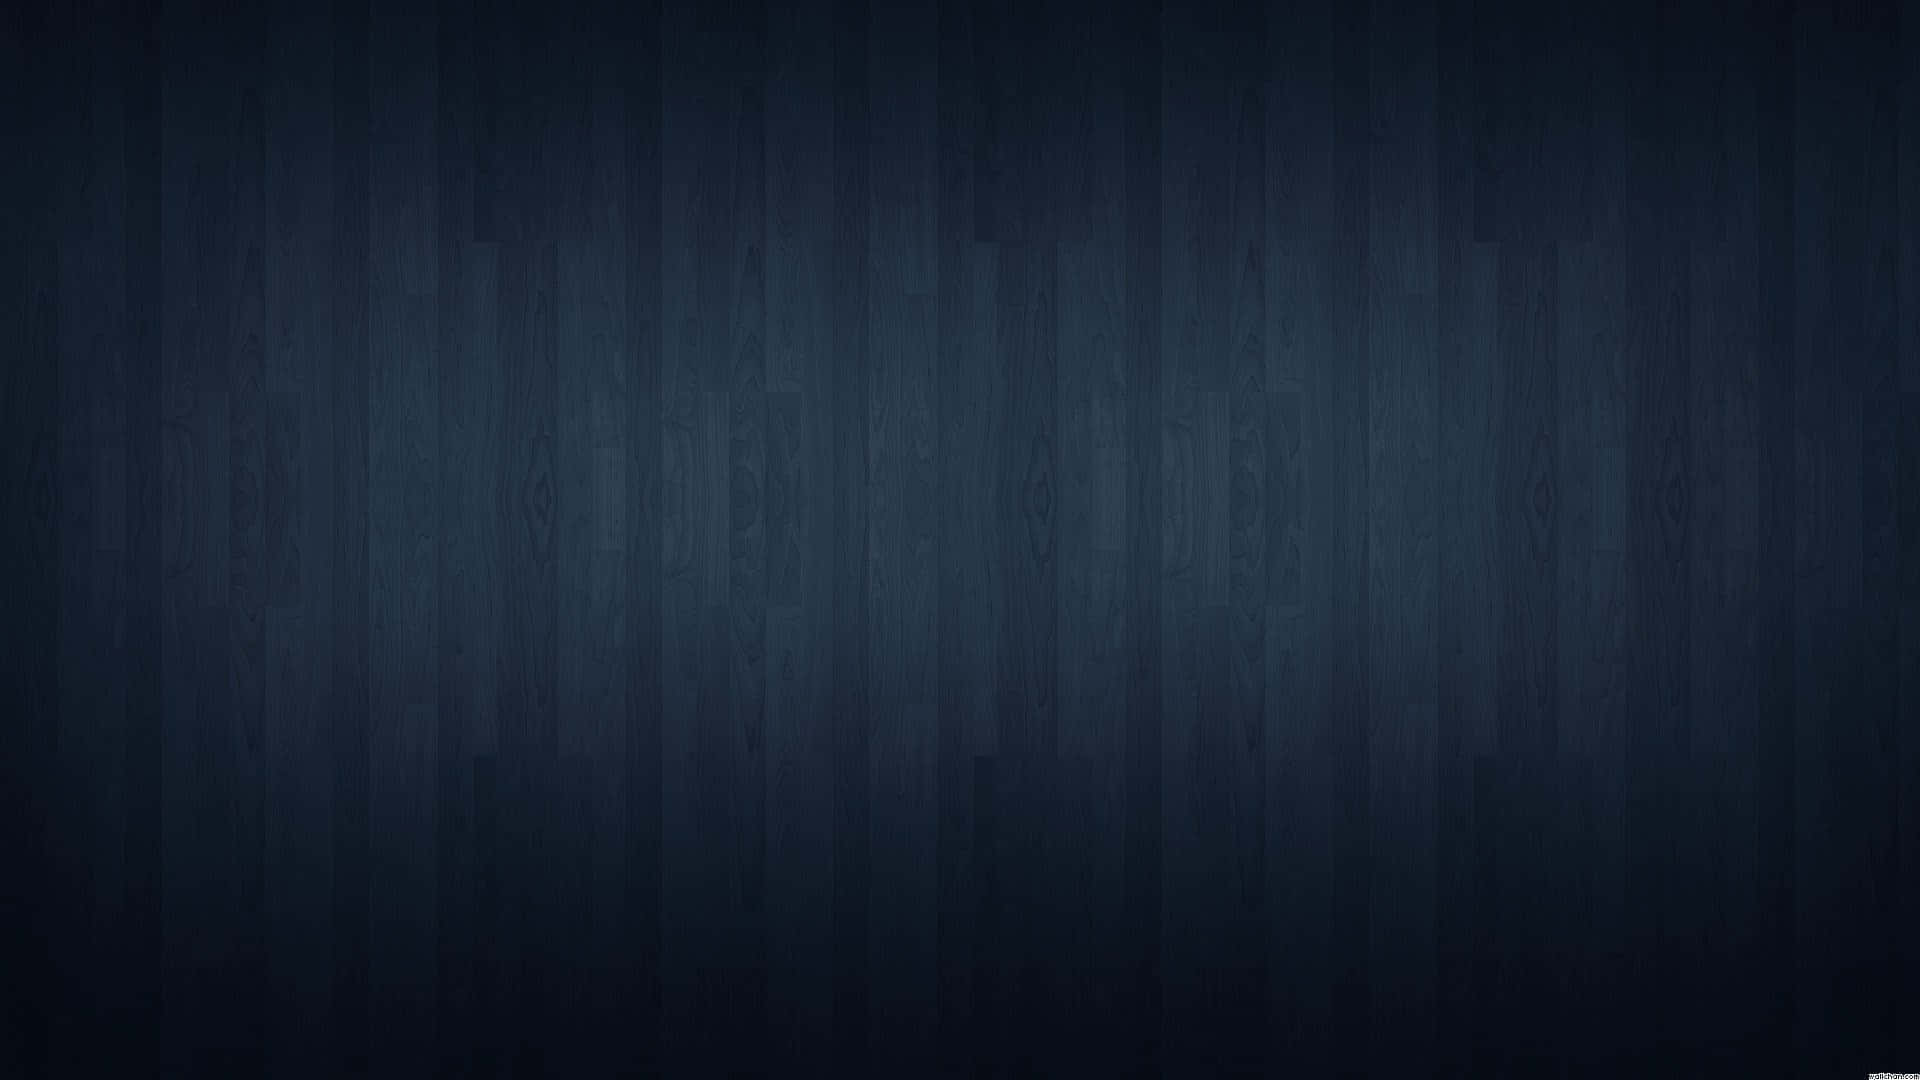 An abstract Dark Blue pattern representing unity and strength Wallpaper